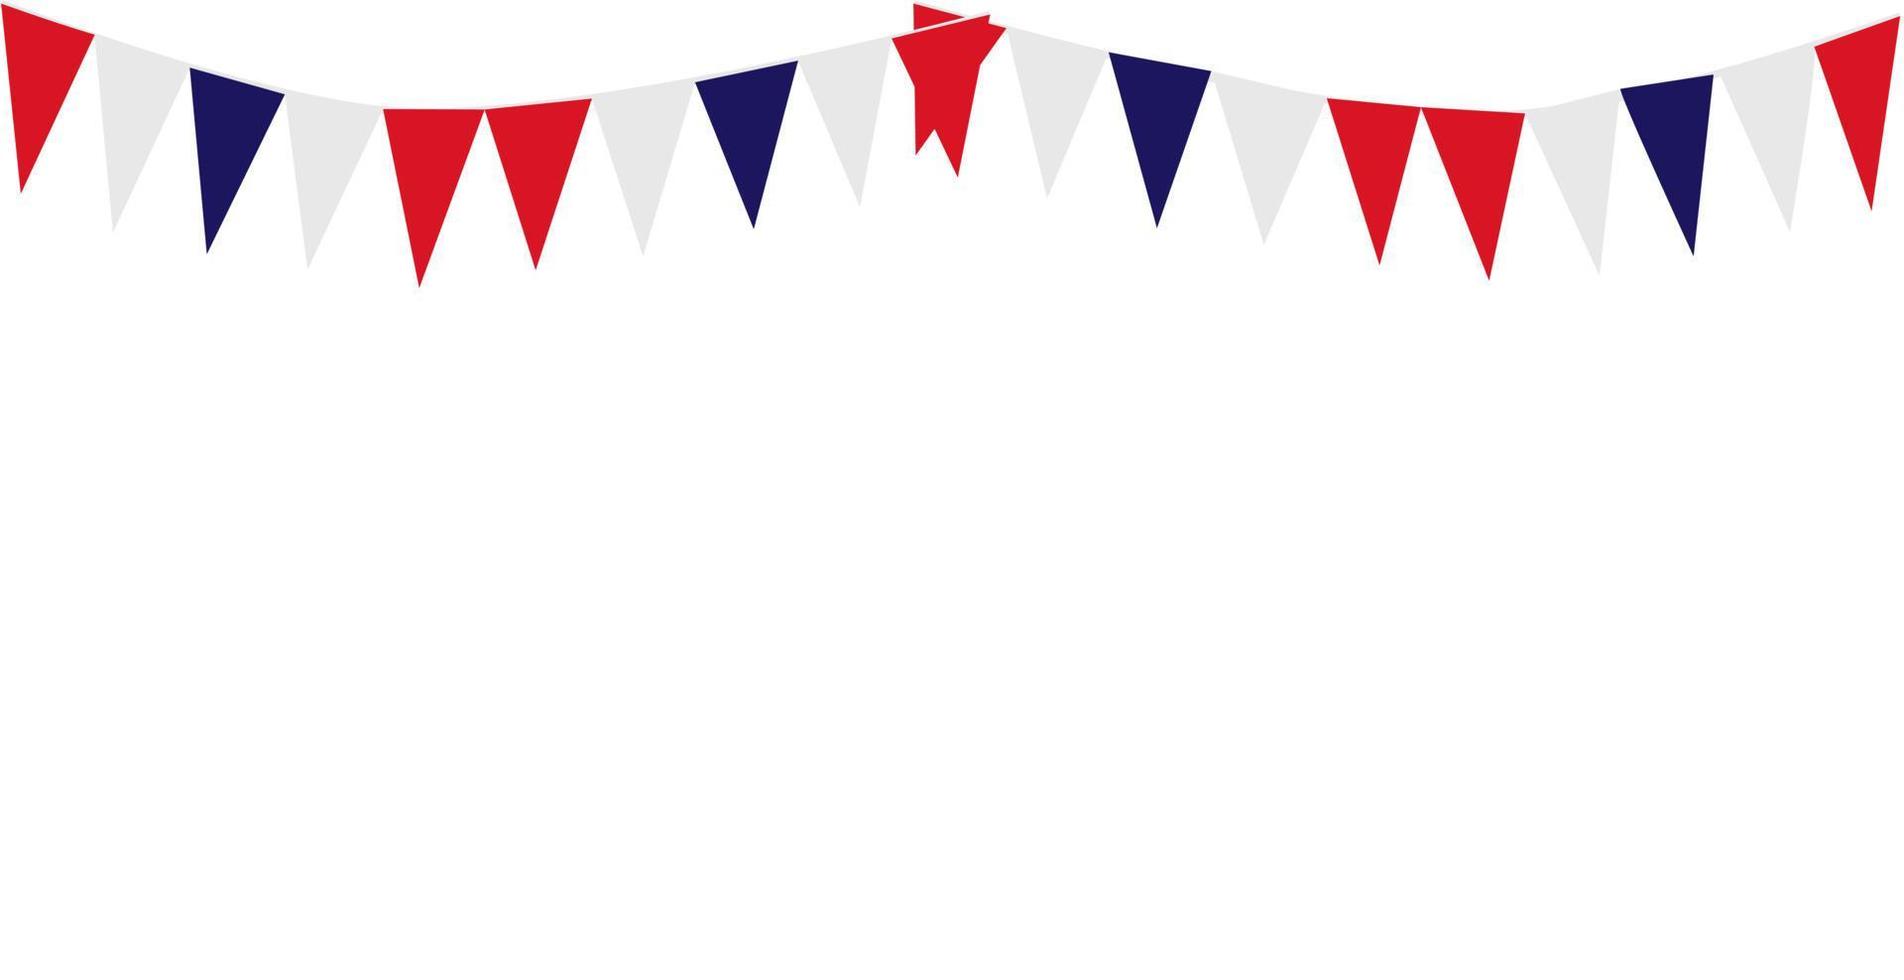 Bunting Hanging Red White Blue Flag Triangles Banner Background. United State of America, France, Thailand, New Zealand. vector